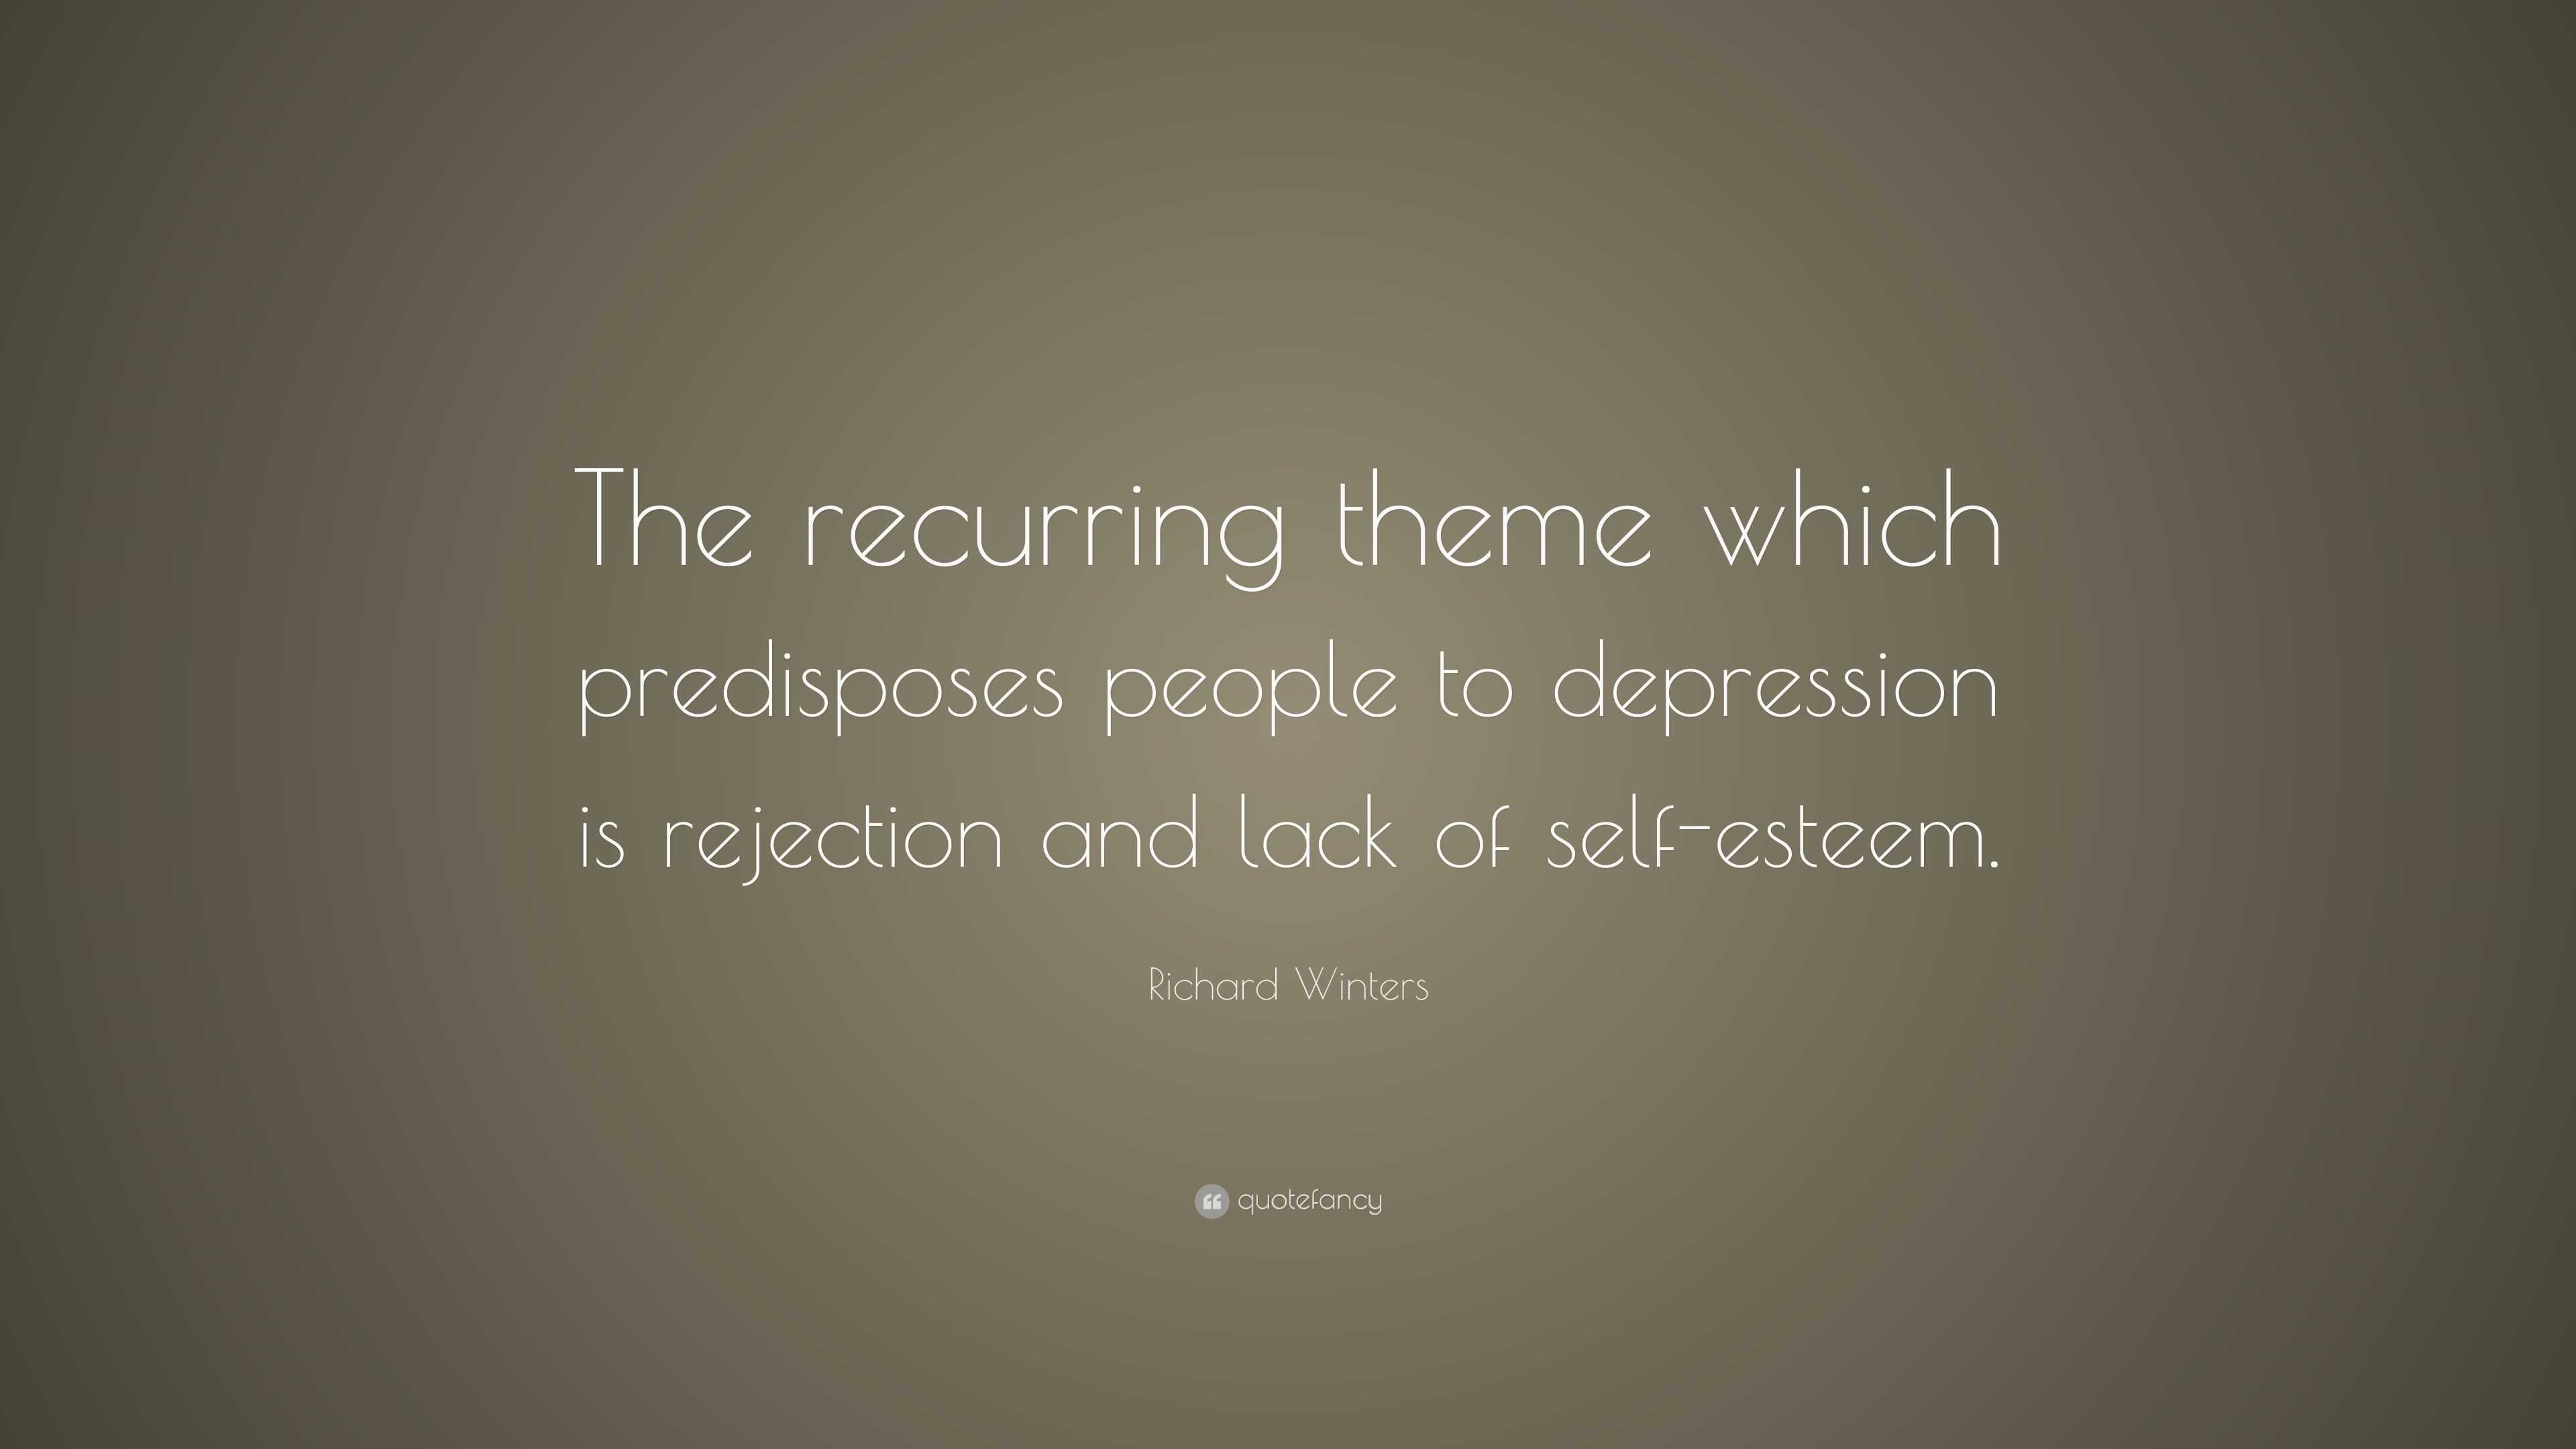 Richard Winters Quote: “The recurring theme which predisposes people to ...